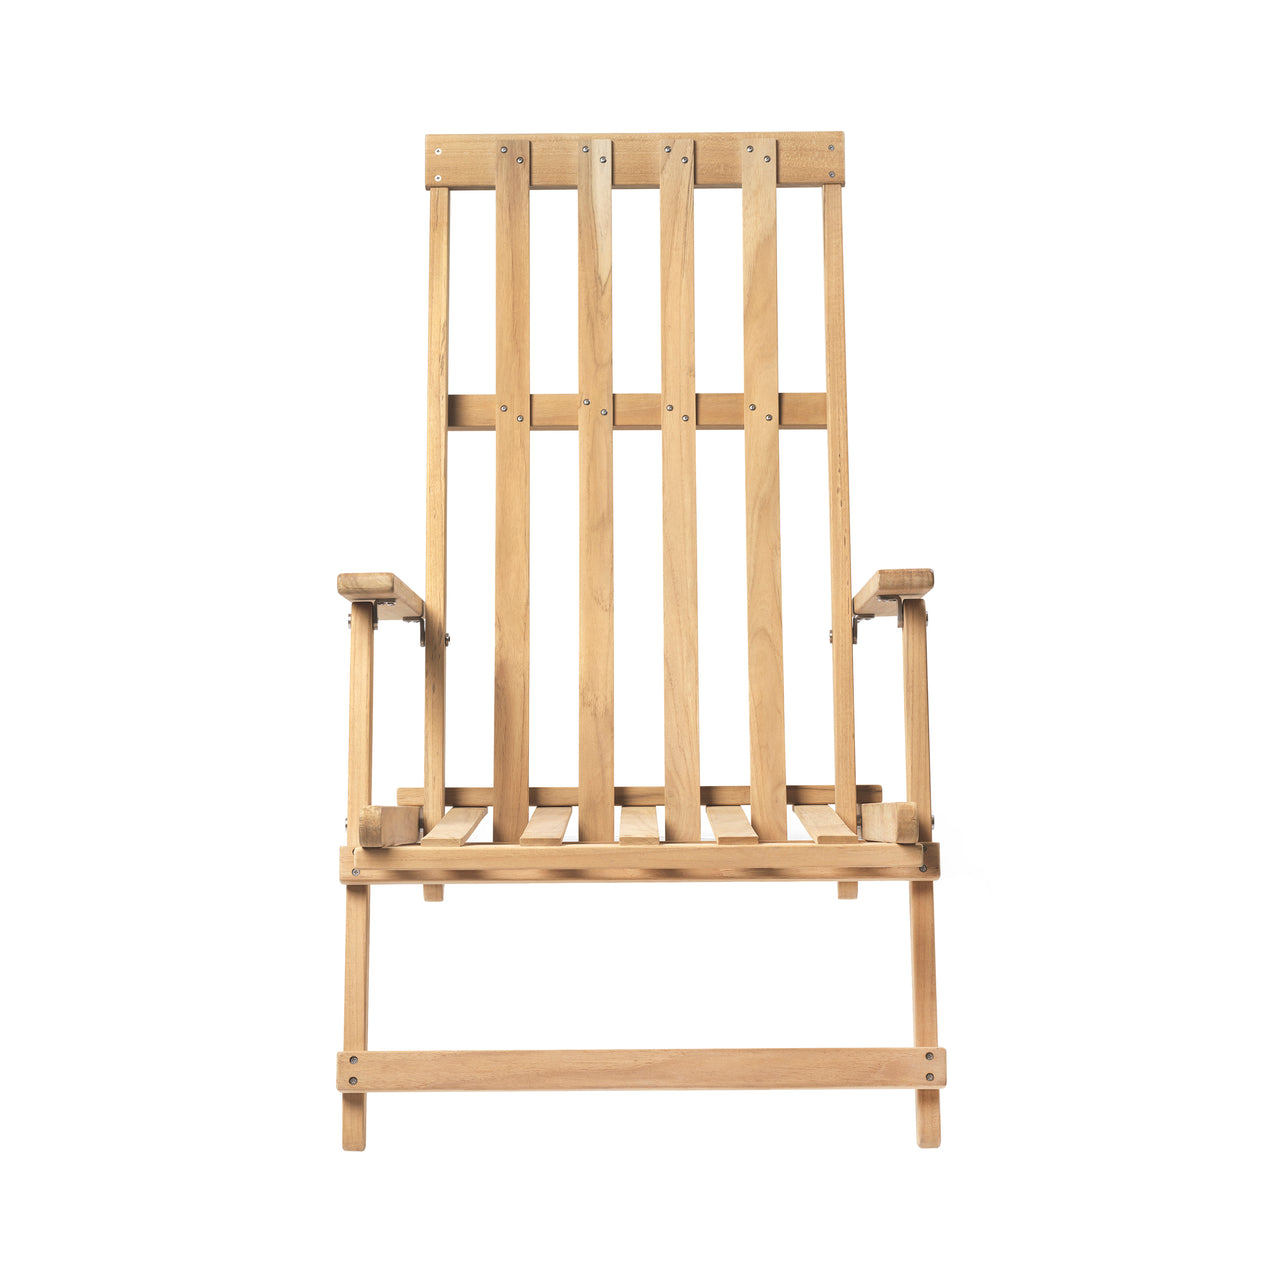 BM5568 Outdoor Deck Chair: Without Cushion